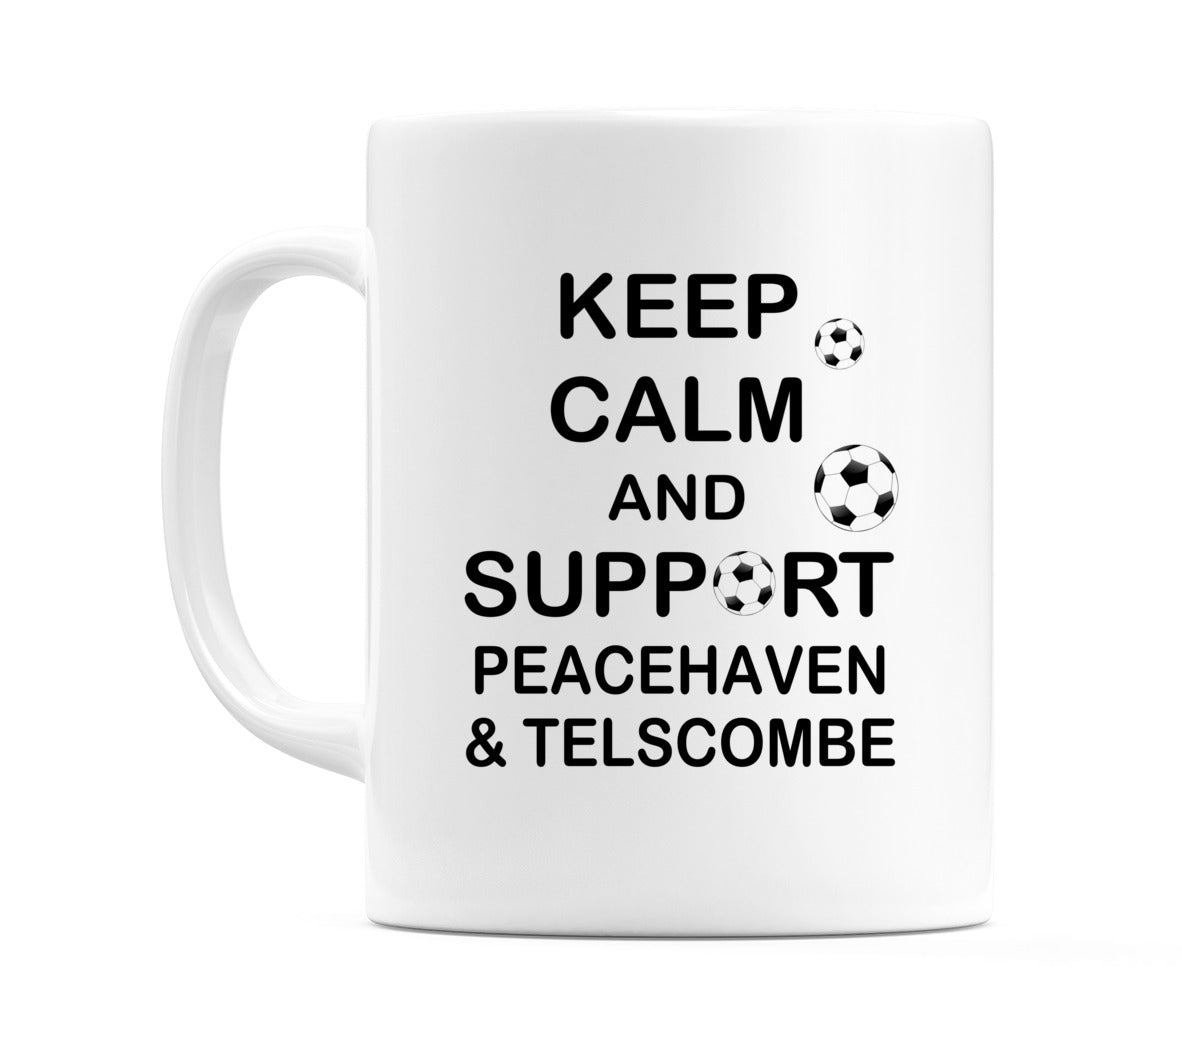 Keep Calm And Support Peacehaven & Telscombe Mug